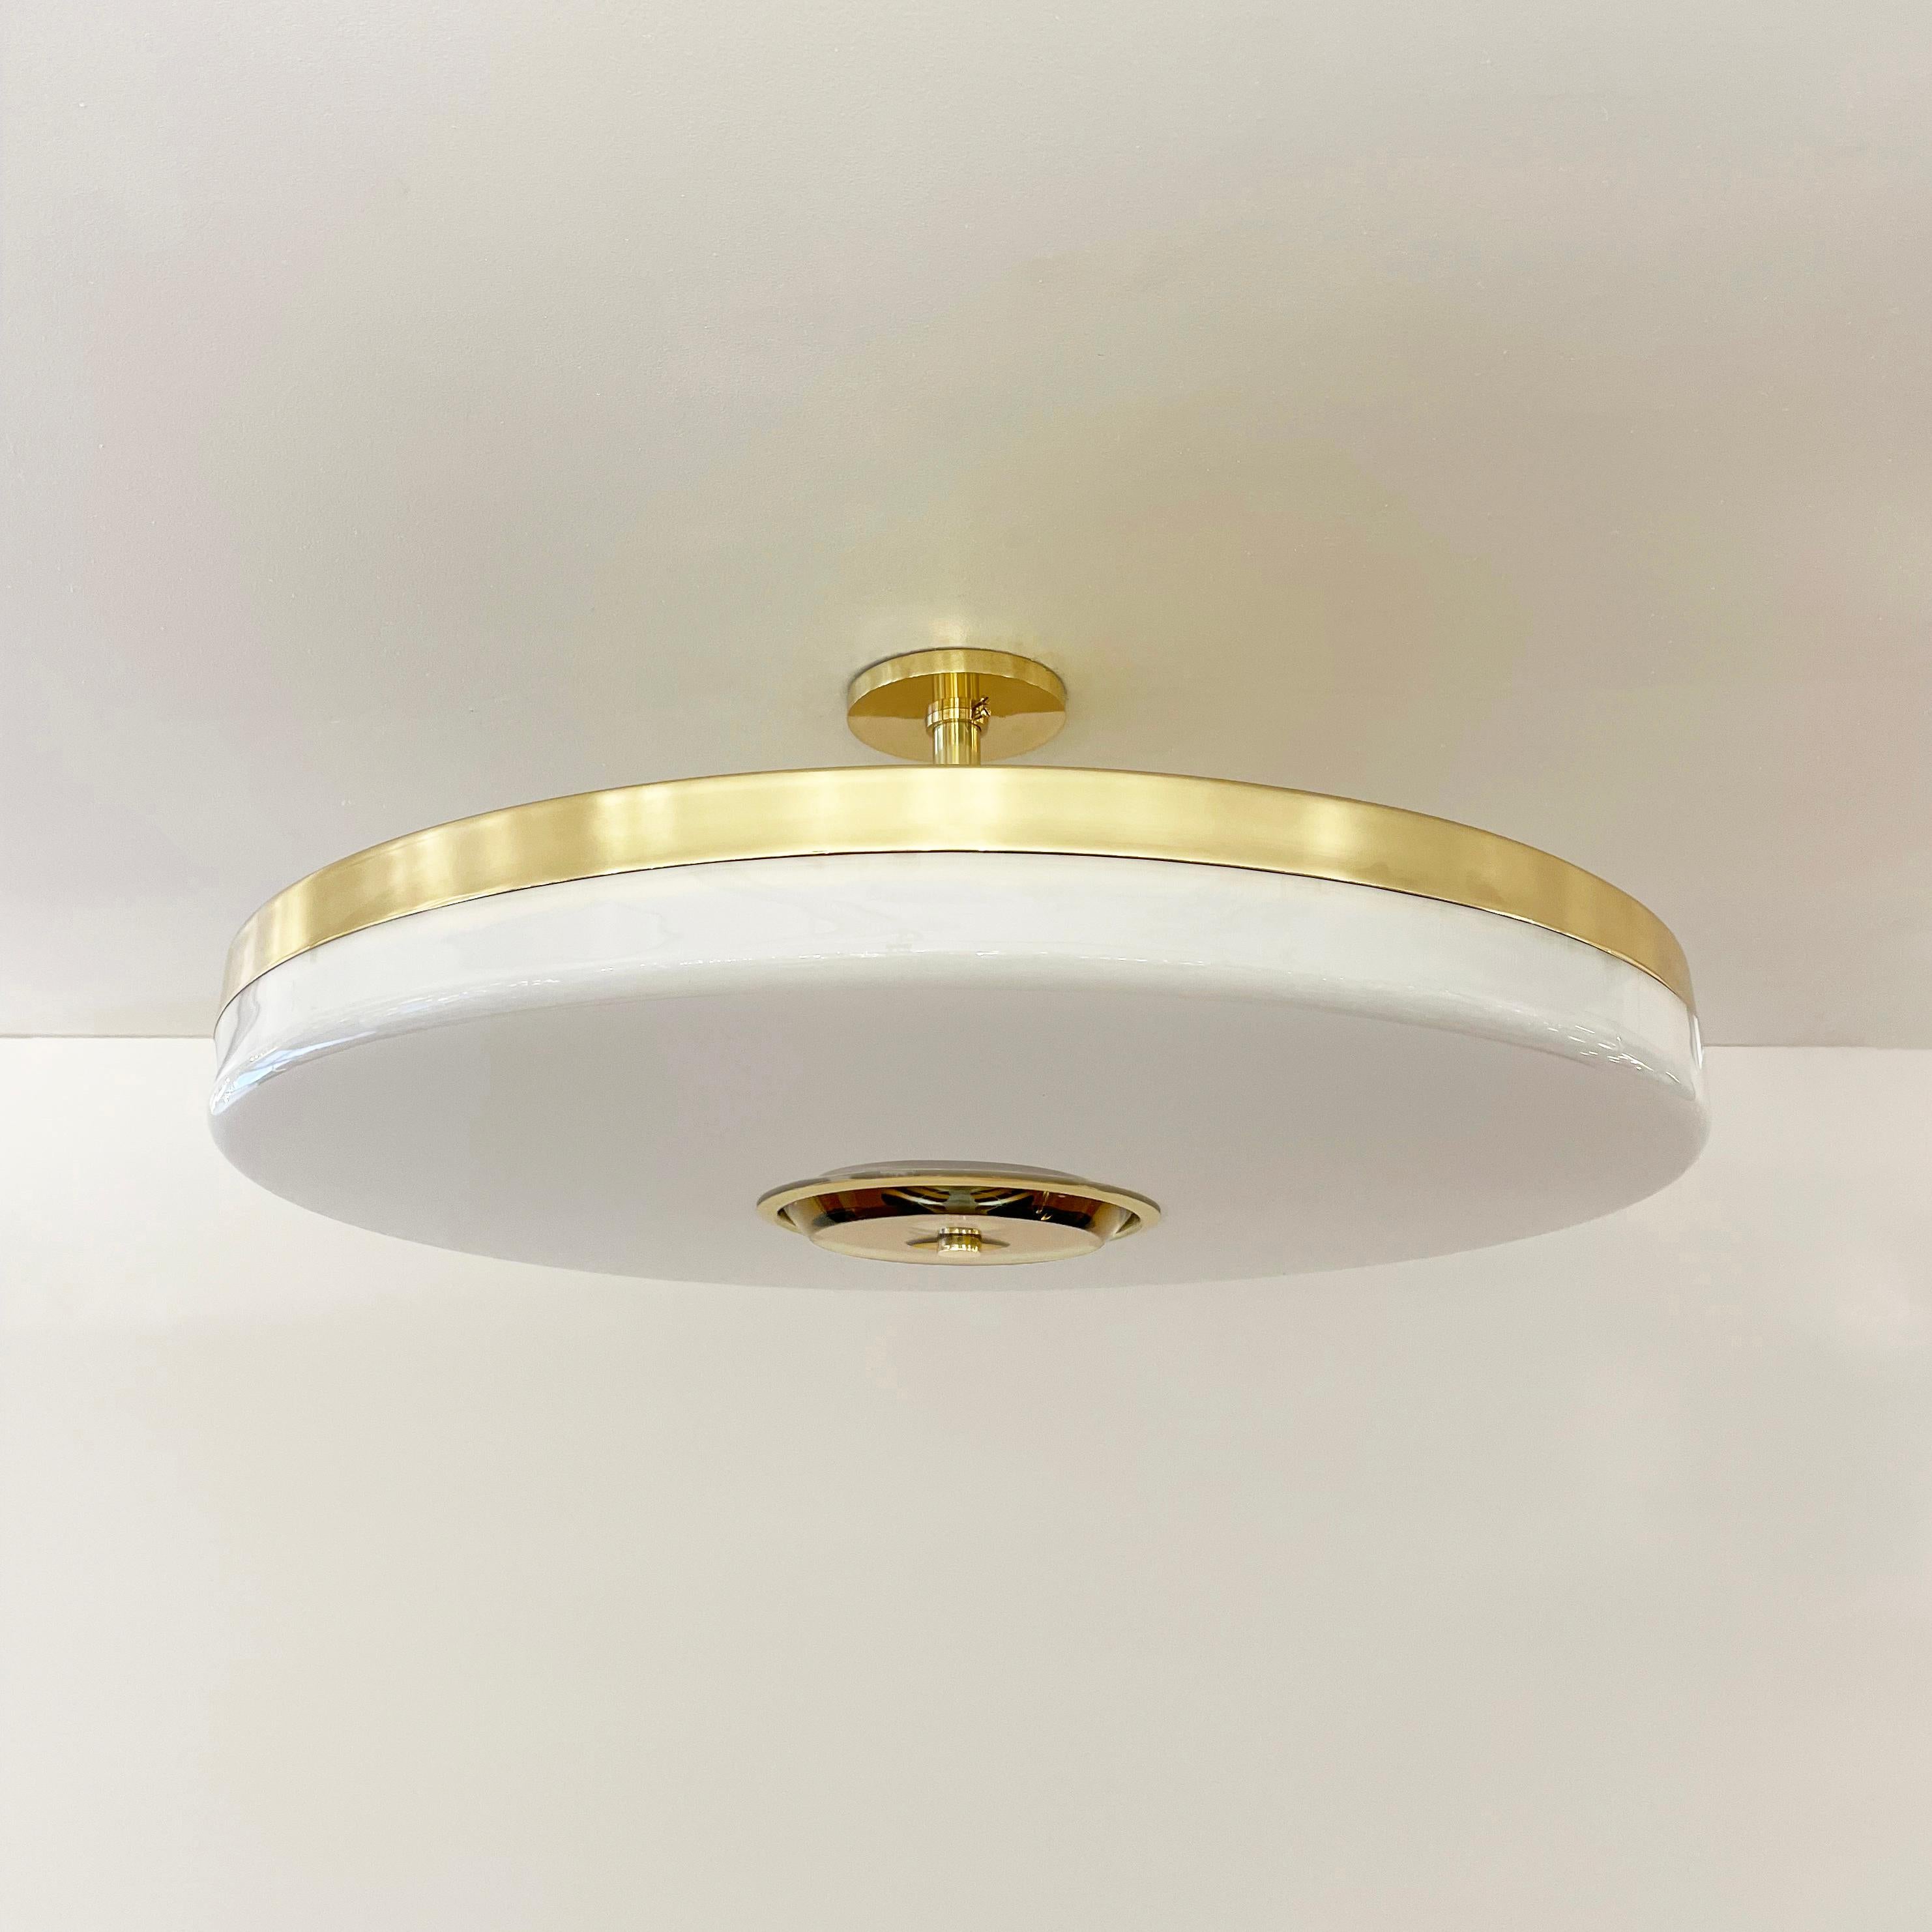 Contemporary Iris Ceiling Light by Gaspare Asaro-Satin Brass Finish For Sale